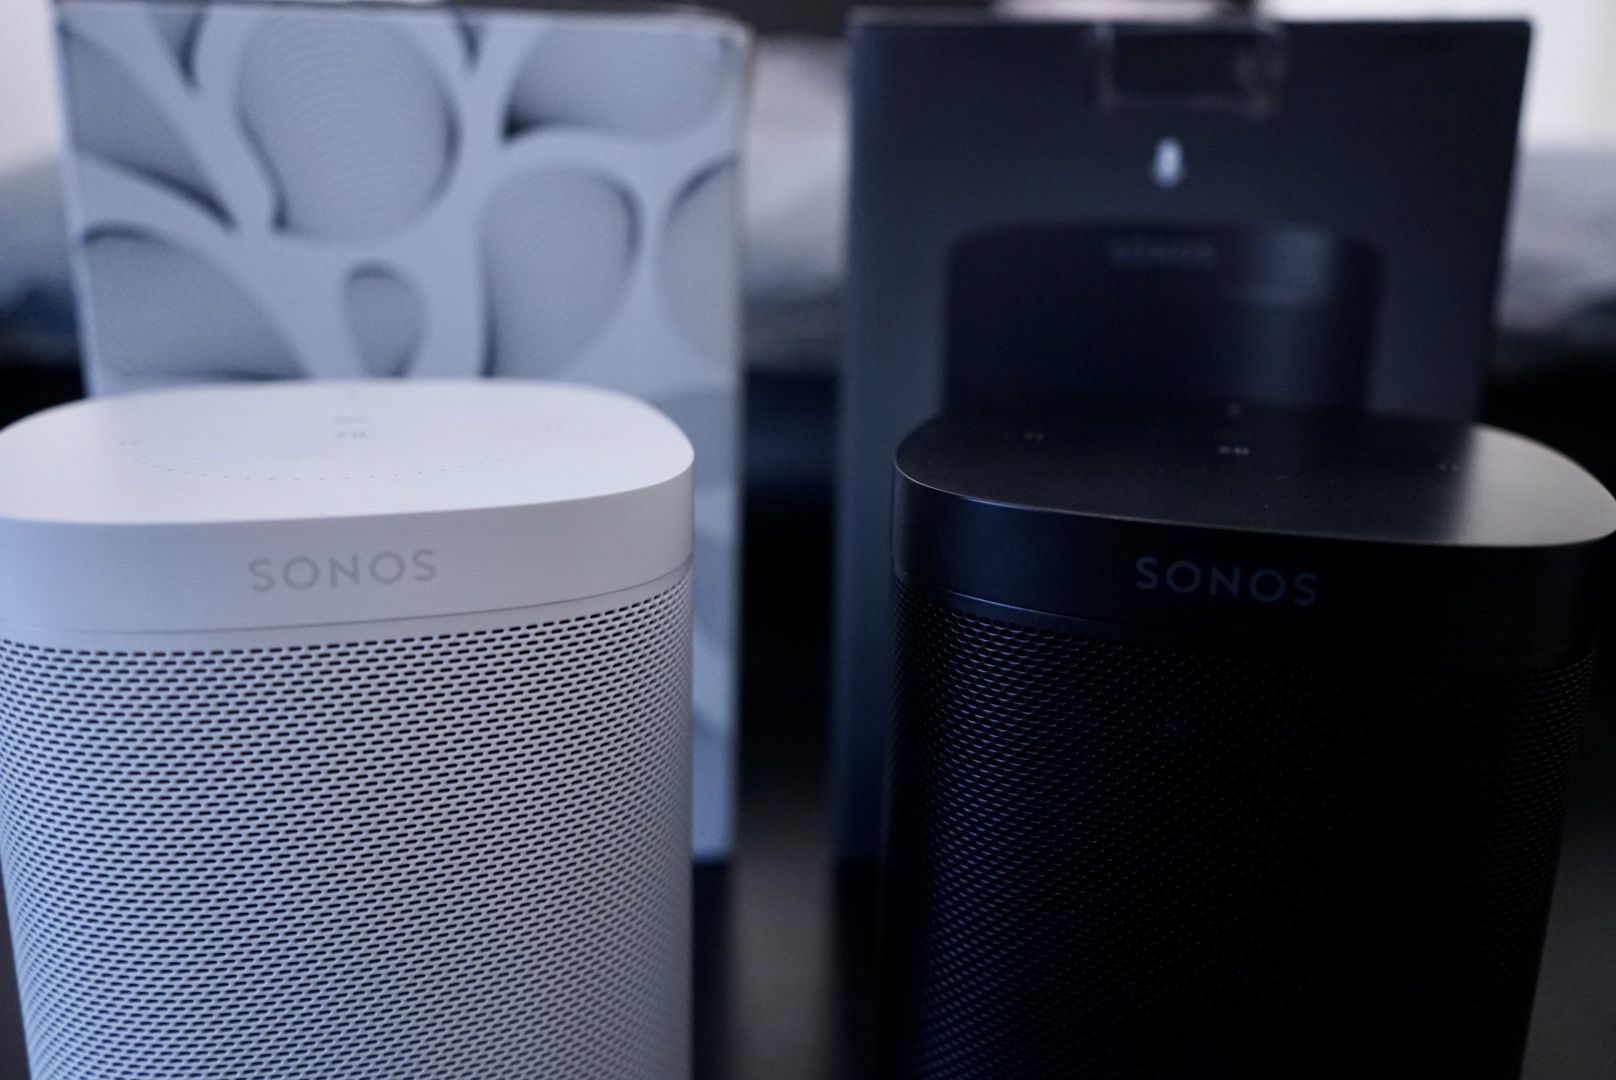 Lot of 2 Sonos Play One (gen 1) - blk & white (both alexa or google assistants)